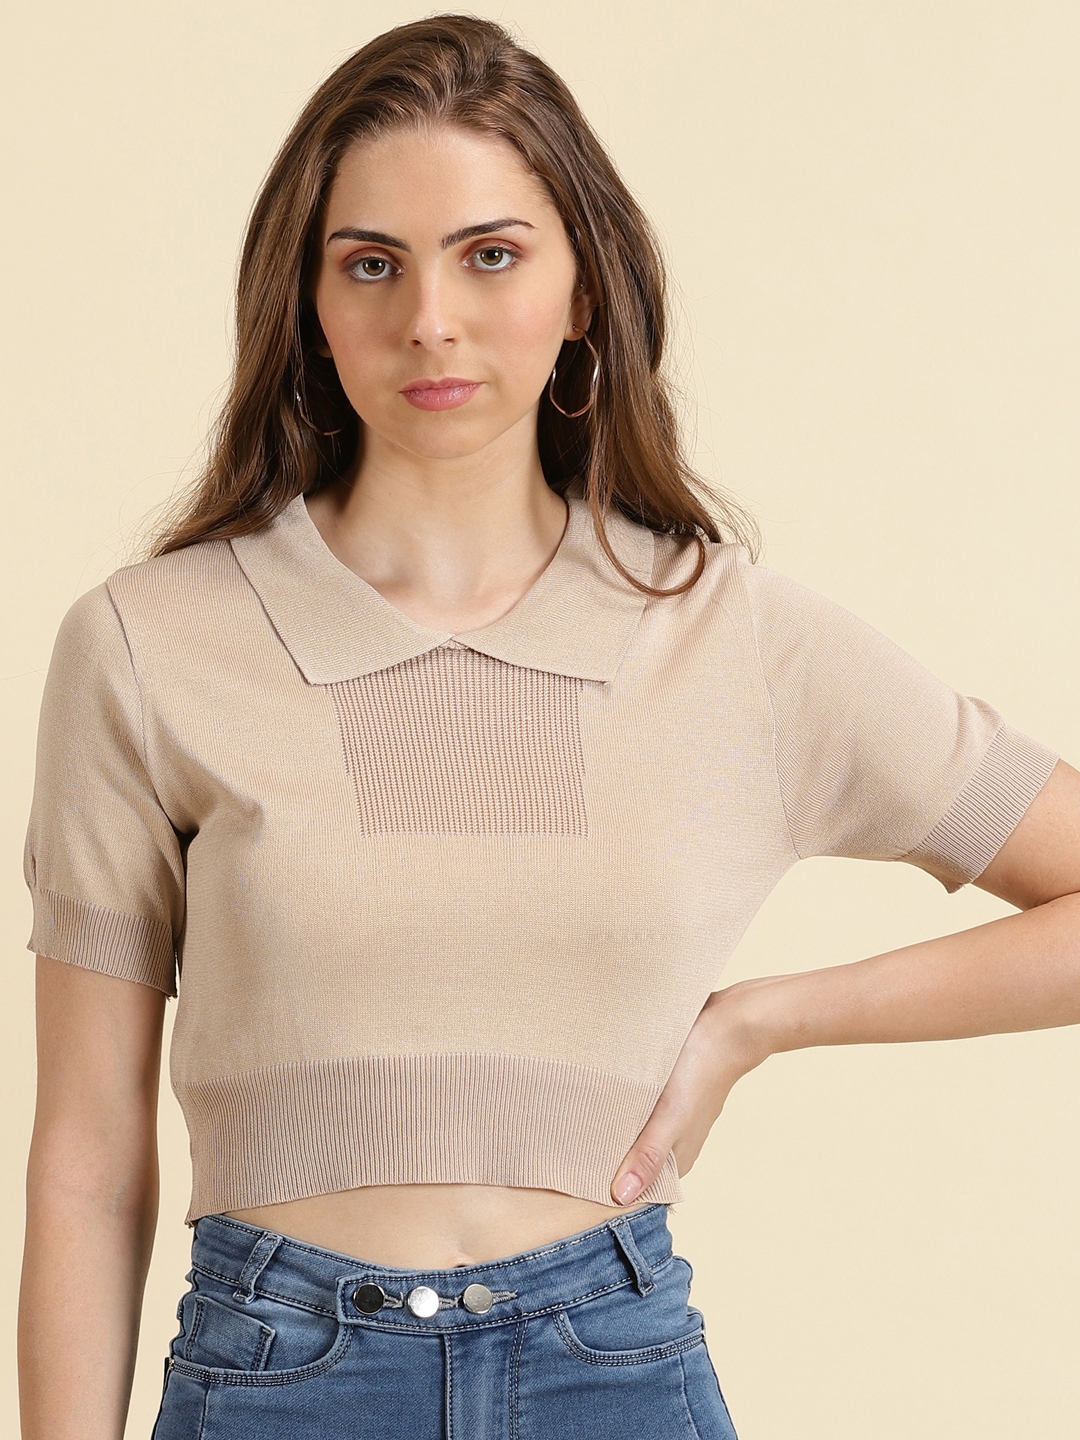 Showoff | SHOWOFF Women's Shirt Collar Solid Beige Fitted Crop Top 1